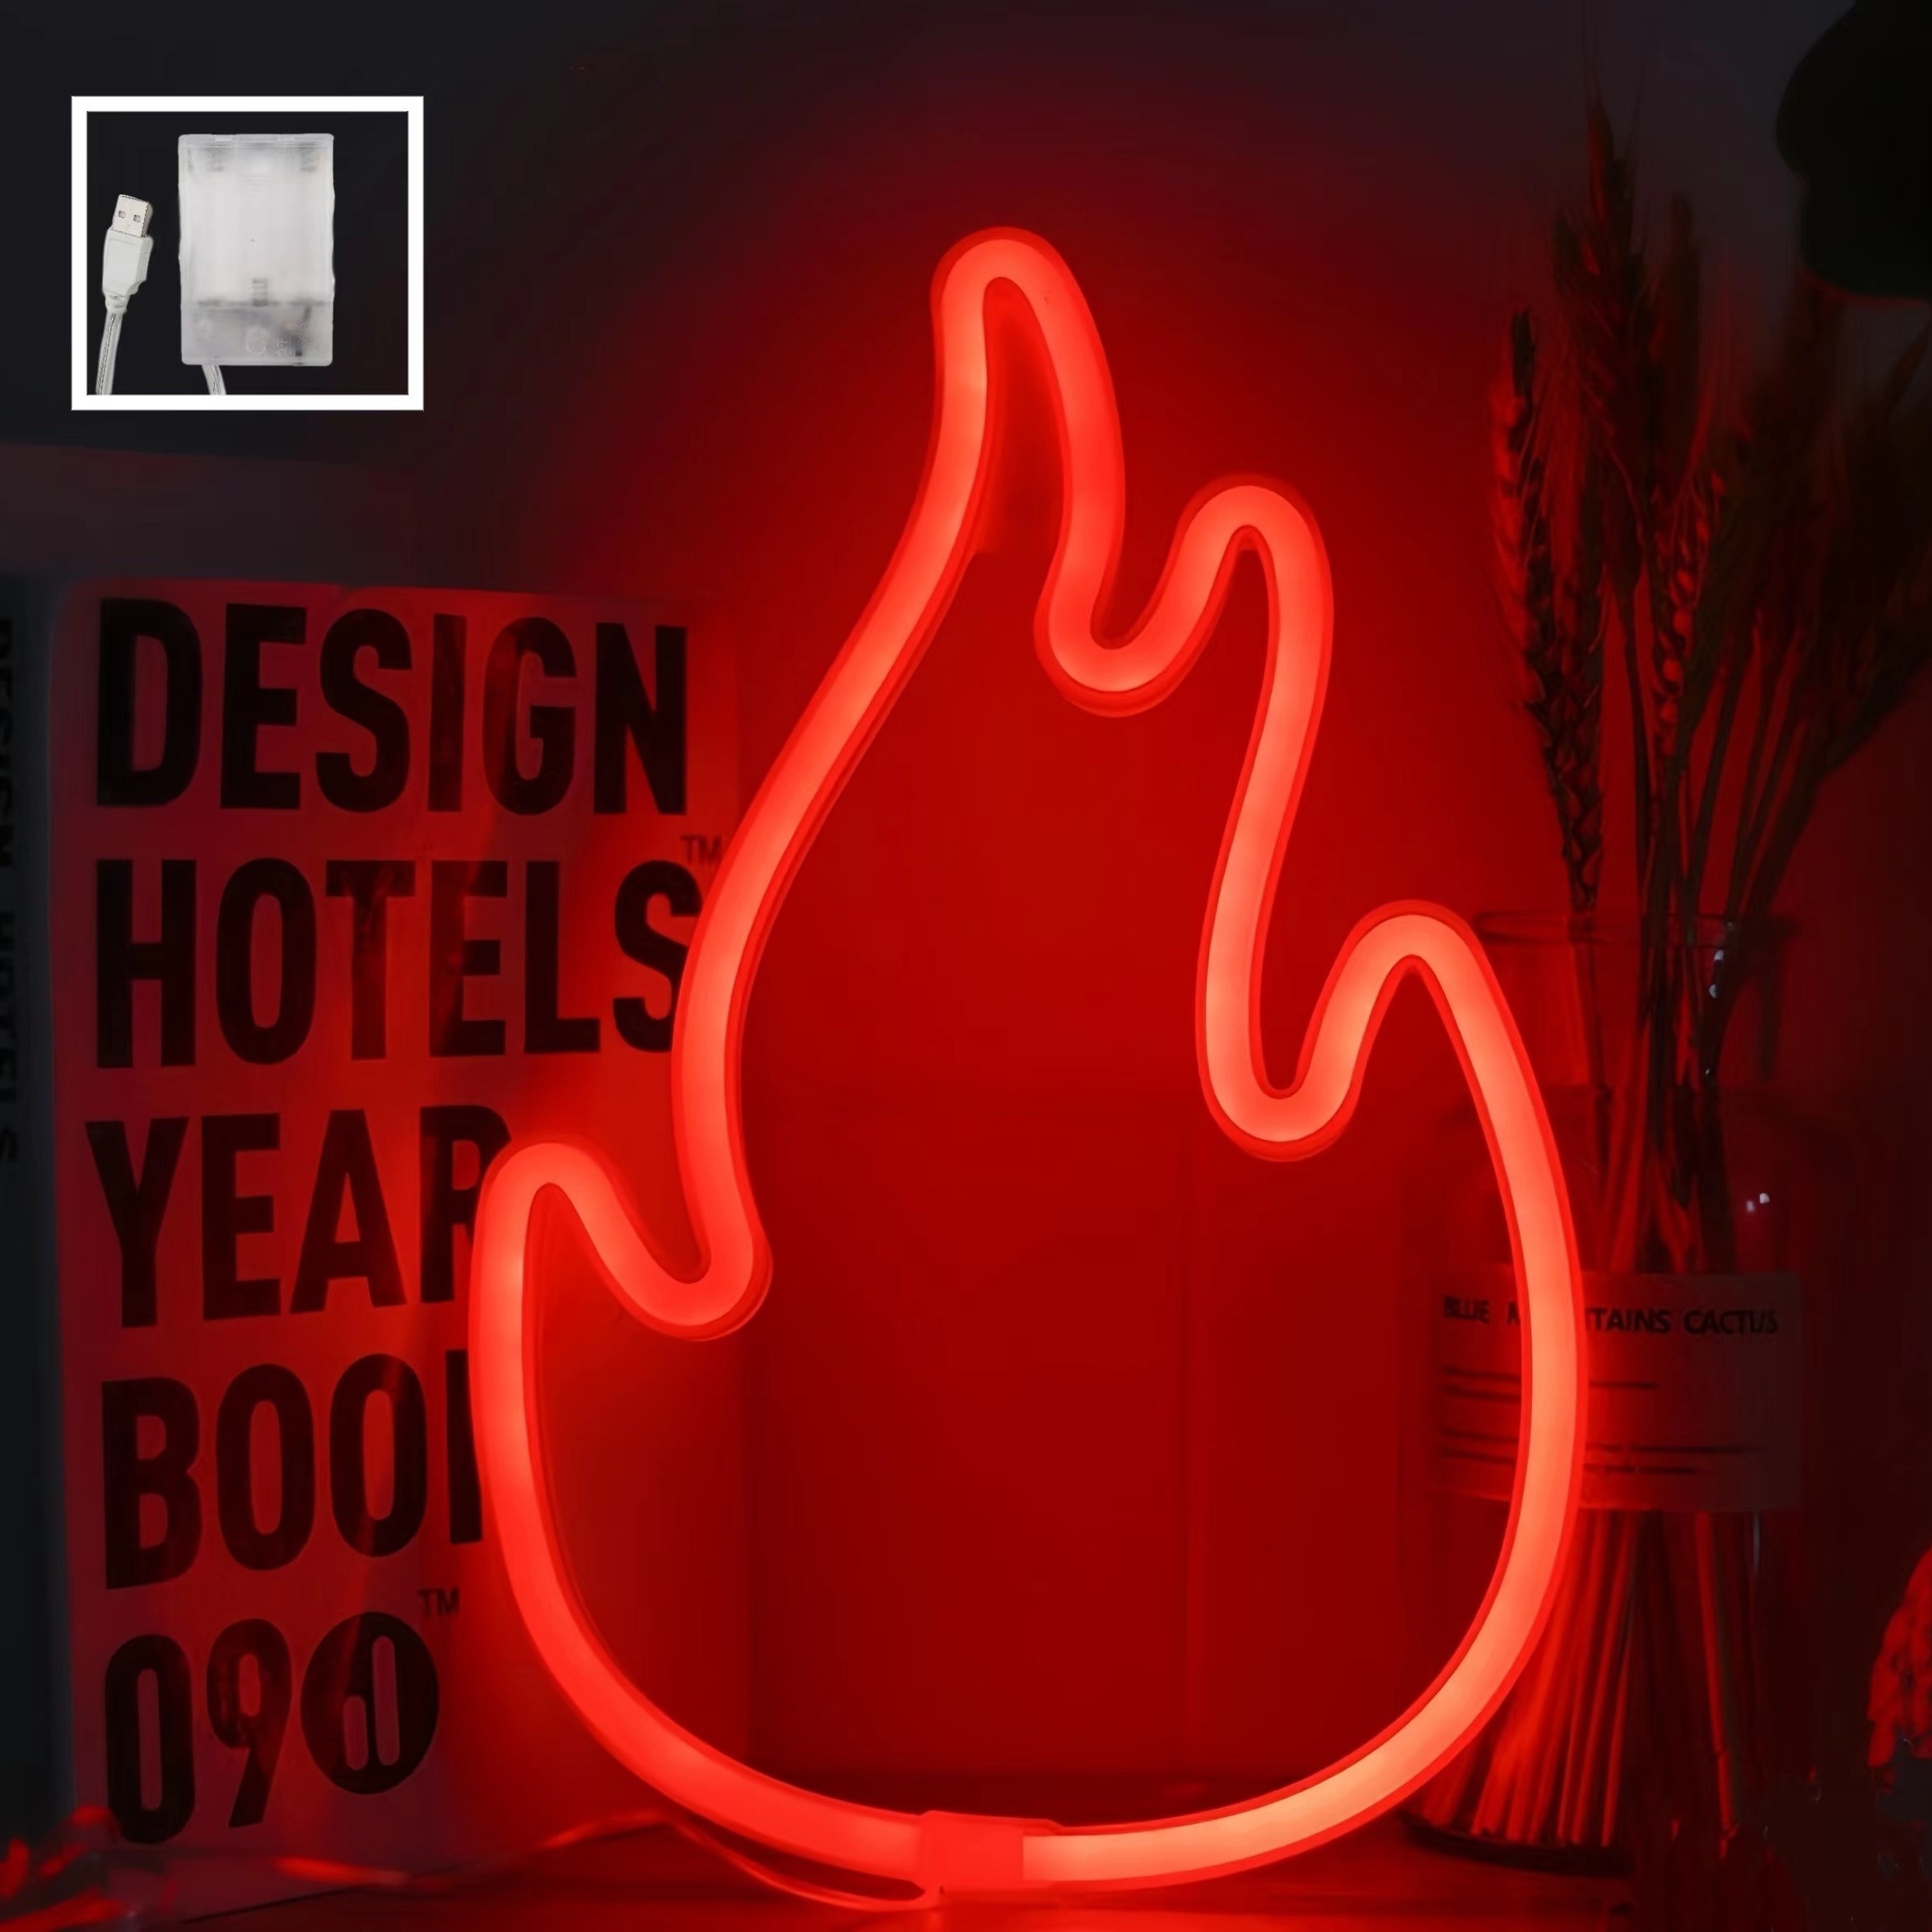 

1pc, Flame Led Neon Art Wall Decoration Light, Powered By Usb Or Battery Box, Suitable For Room, Store, Holiday Decoration, Home Decoration, Bar, Party, Wedding Wall Decoration (excluding Battery)